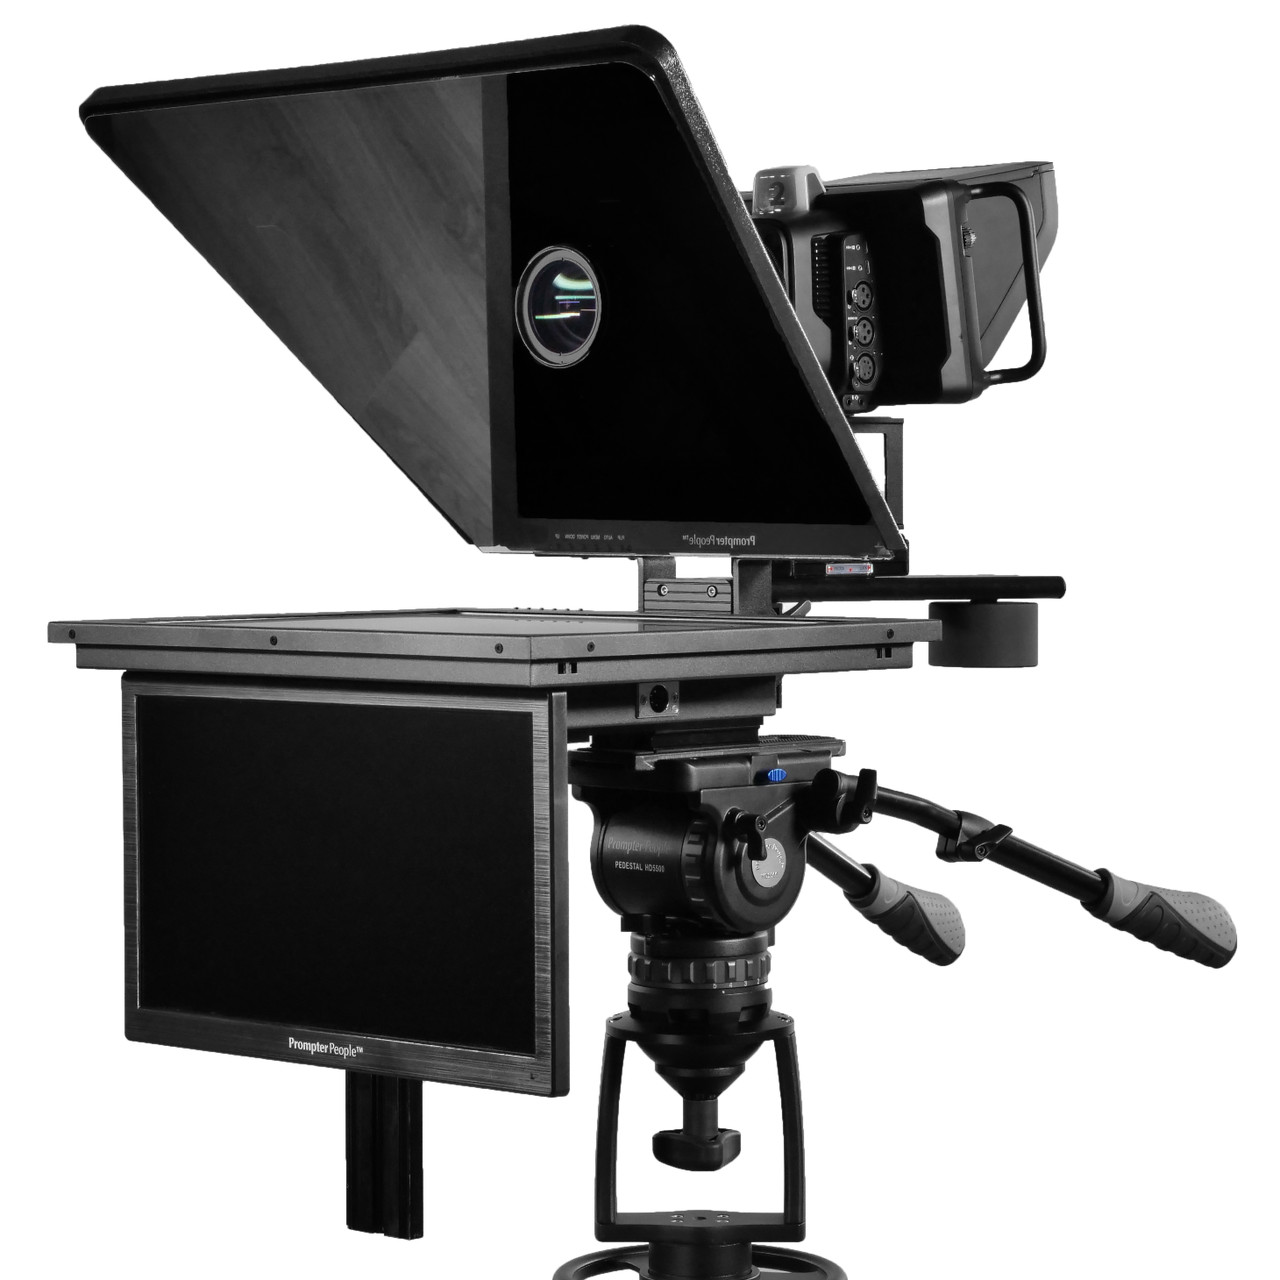 Flex Plus Talent Monitor Teleprompter | 19" 400 NIT Regular Prompting Monitor HDMI | VGA with 15.6" Color Accurate RGB IPS 3G-SDI Talent Monitor